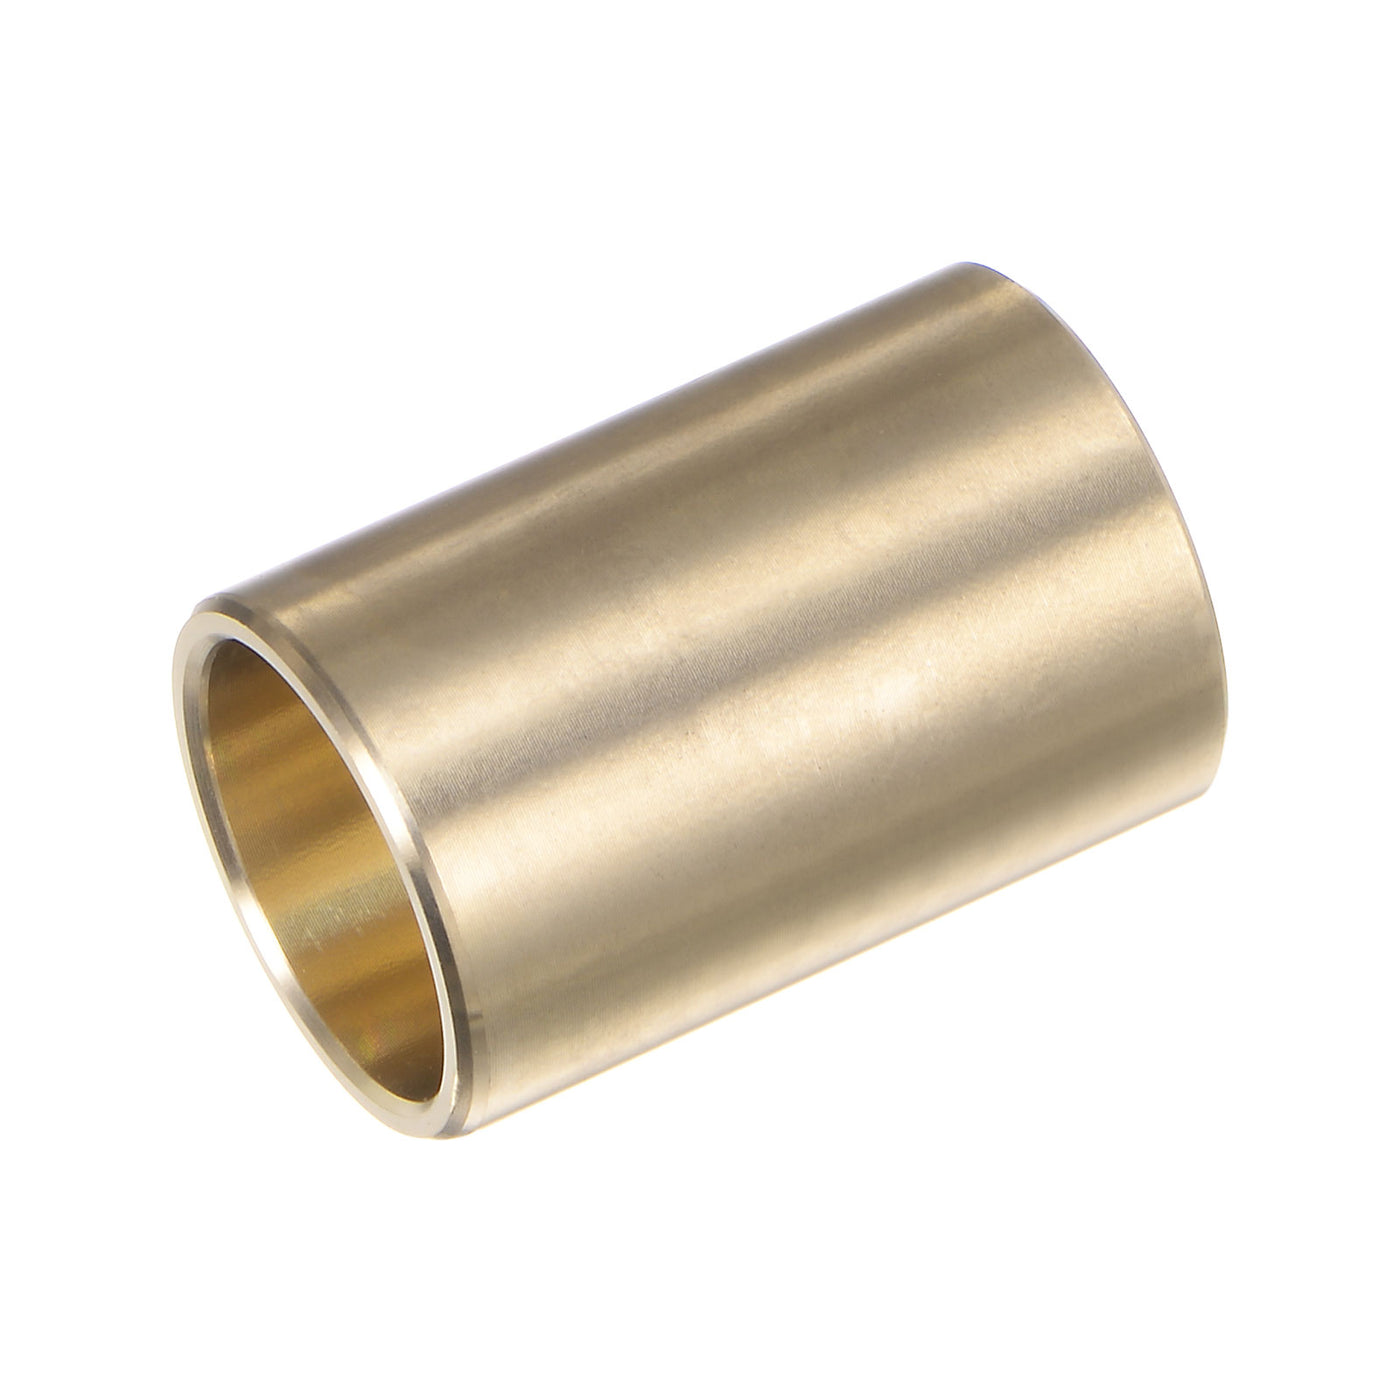 uxcell Uxcell 3pcs Sleeve Bearings 5/8" x 3/4" x 1-1/8" Wrapped Oilless Bushings Cast Brass